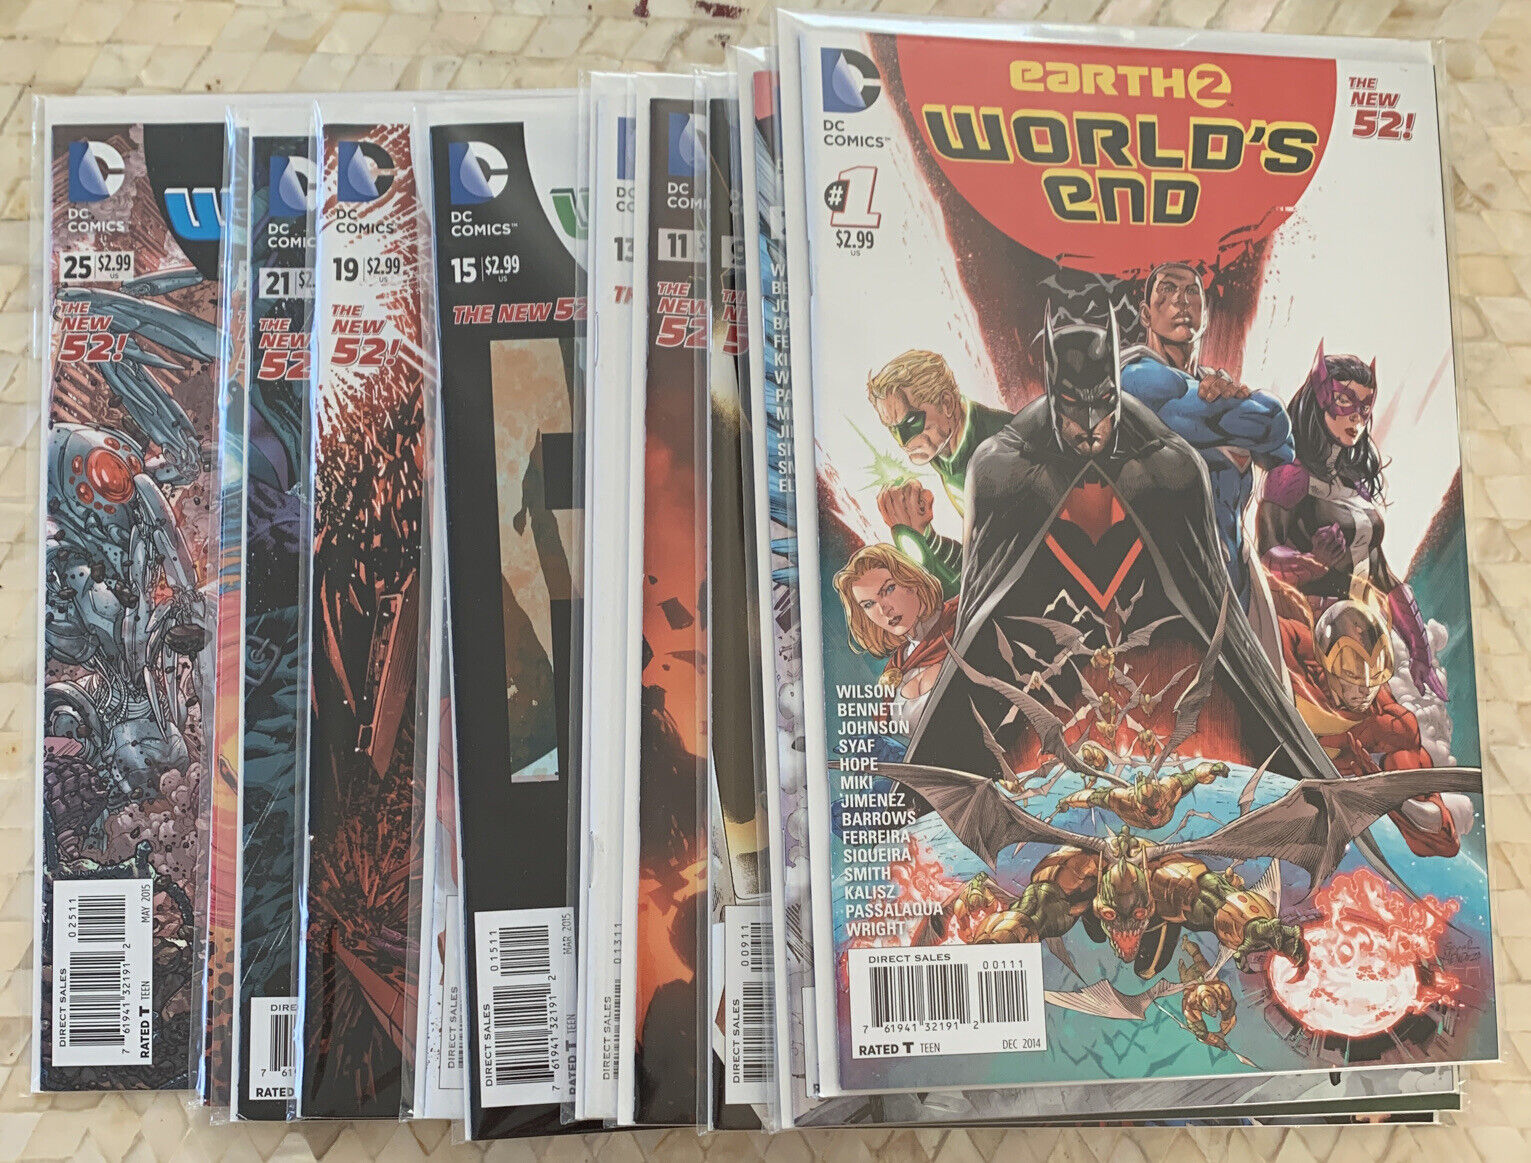 EARTH 2: WORLD'S END #1-25 Lot FIRST PRINTINGS, NM Superman Mister Miracle